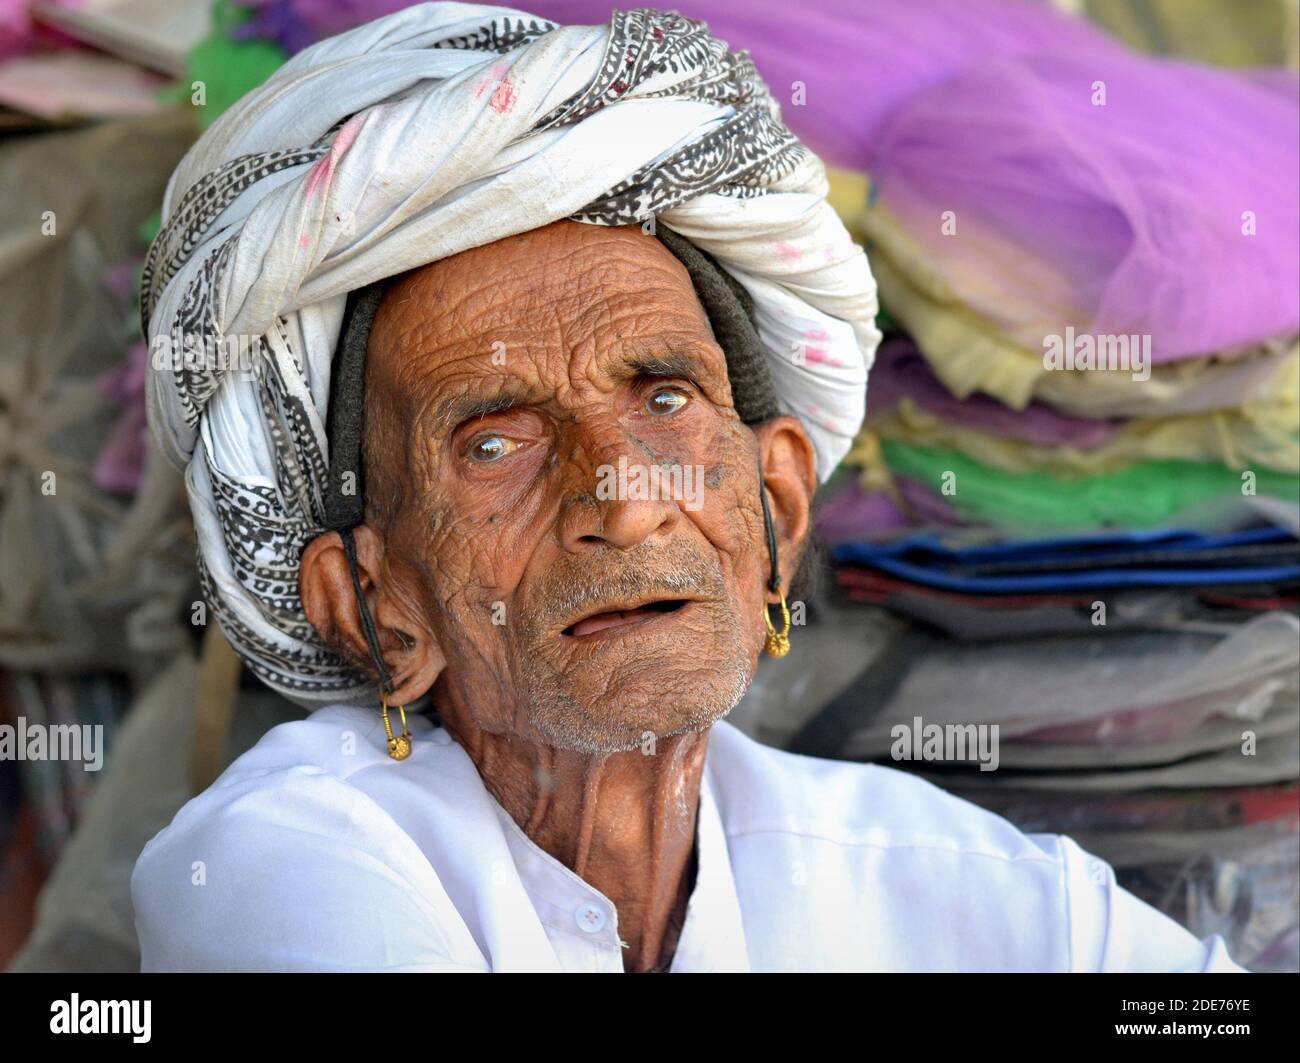 Frail old toothless Indian Rabari man with golden tribal earrings and wrinkled face wears a traditional turban and looks at the viewer. Stock Photo